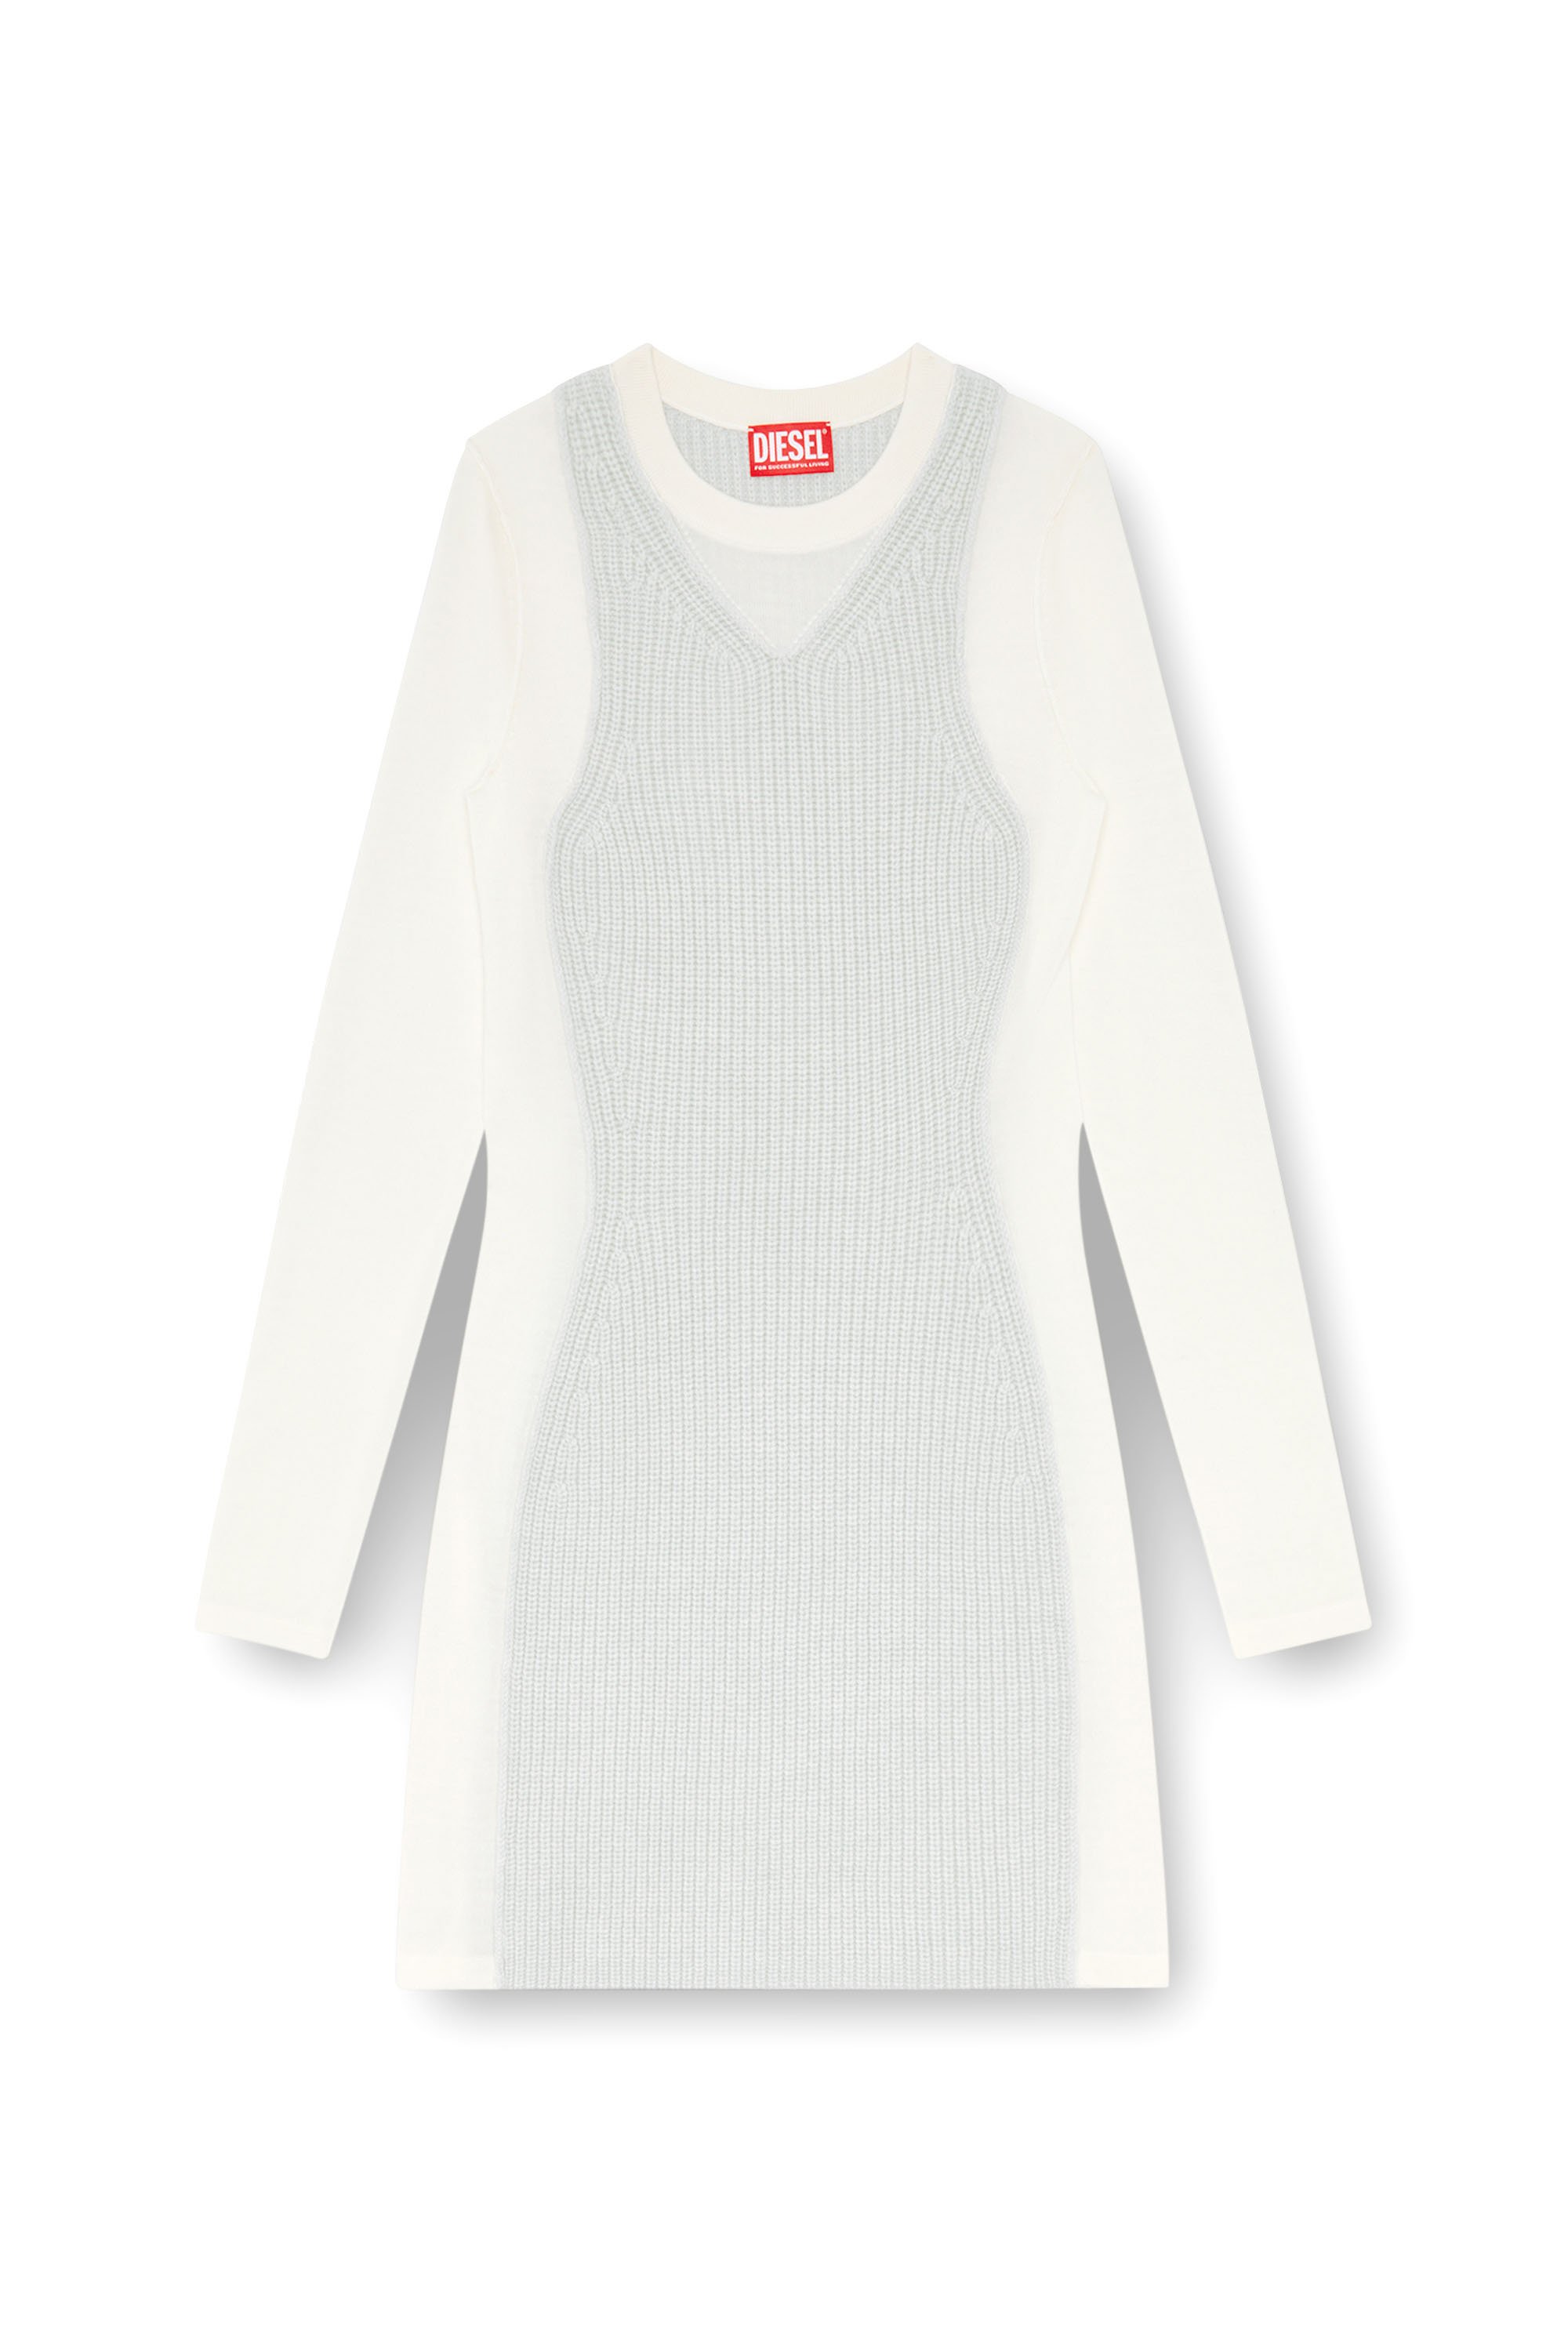 Diesel - M-ARENA, Woman Short knit dress with layered effect in White - Image 1